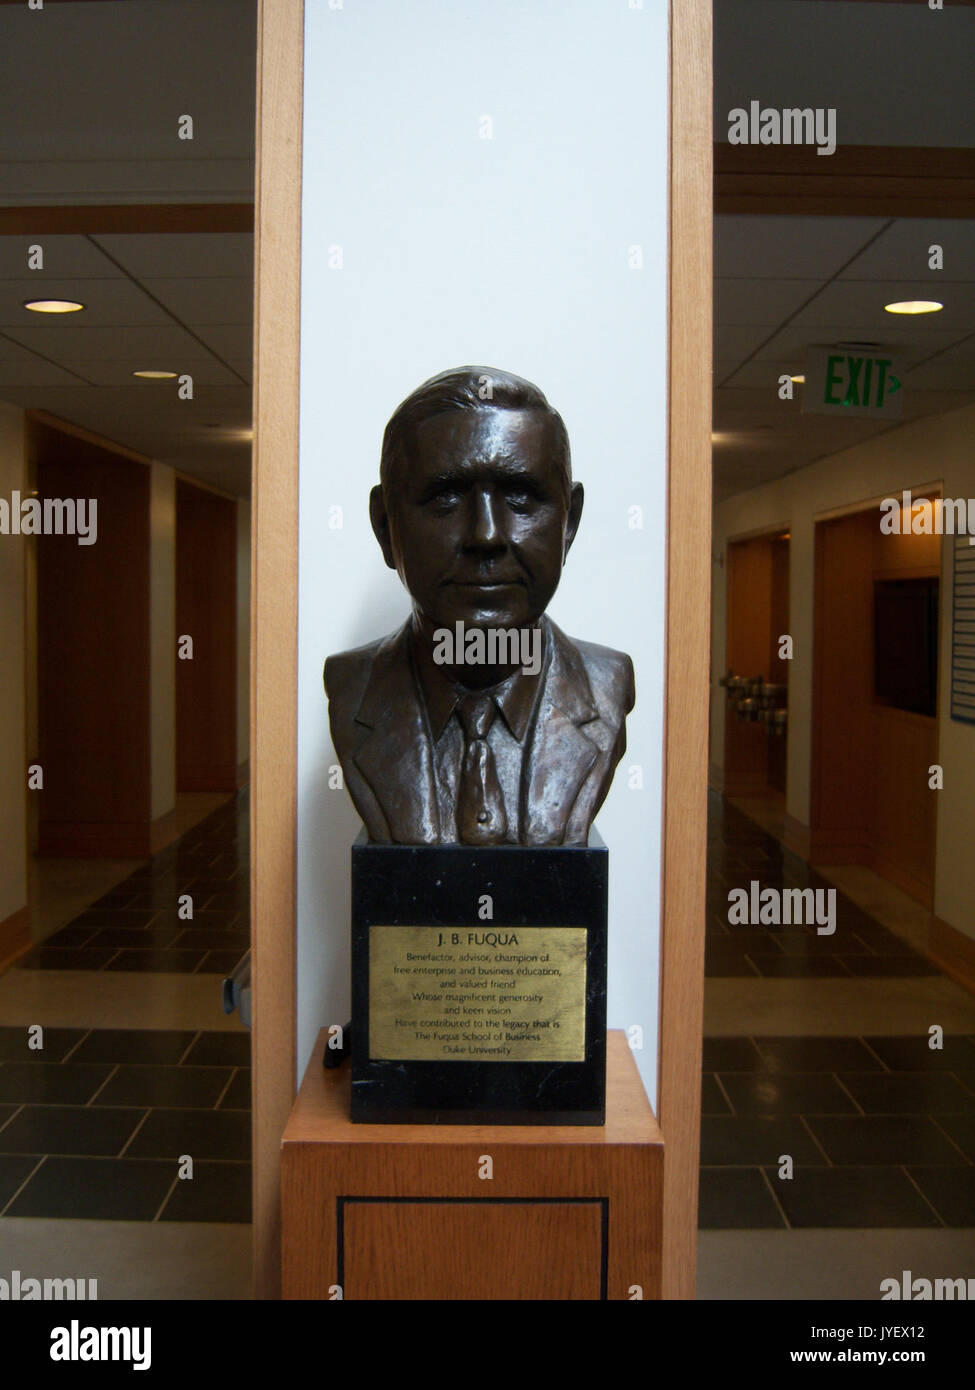 A Bust of J.B. Fuqua in the Hall of Flags at the Fuqua School of Business Stock Photo